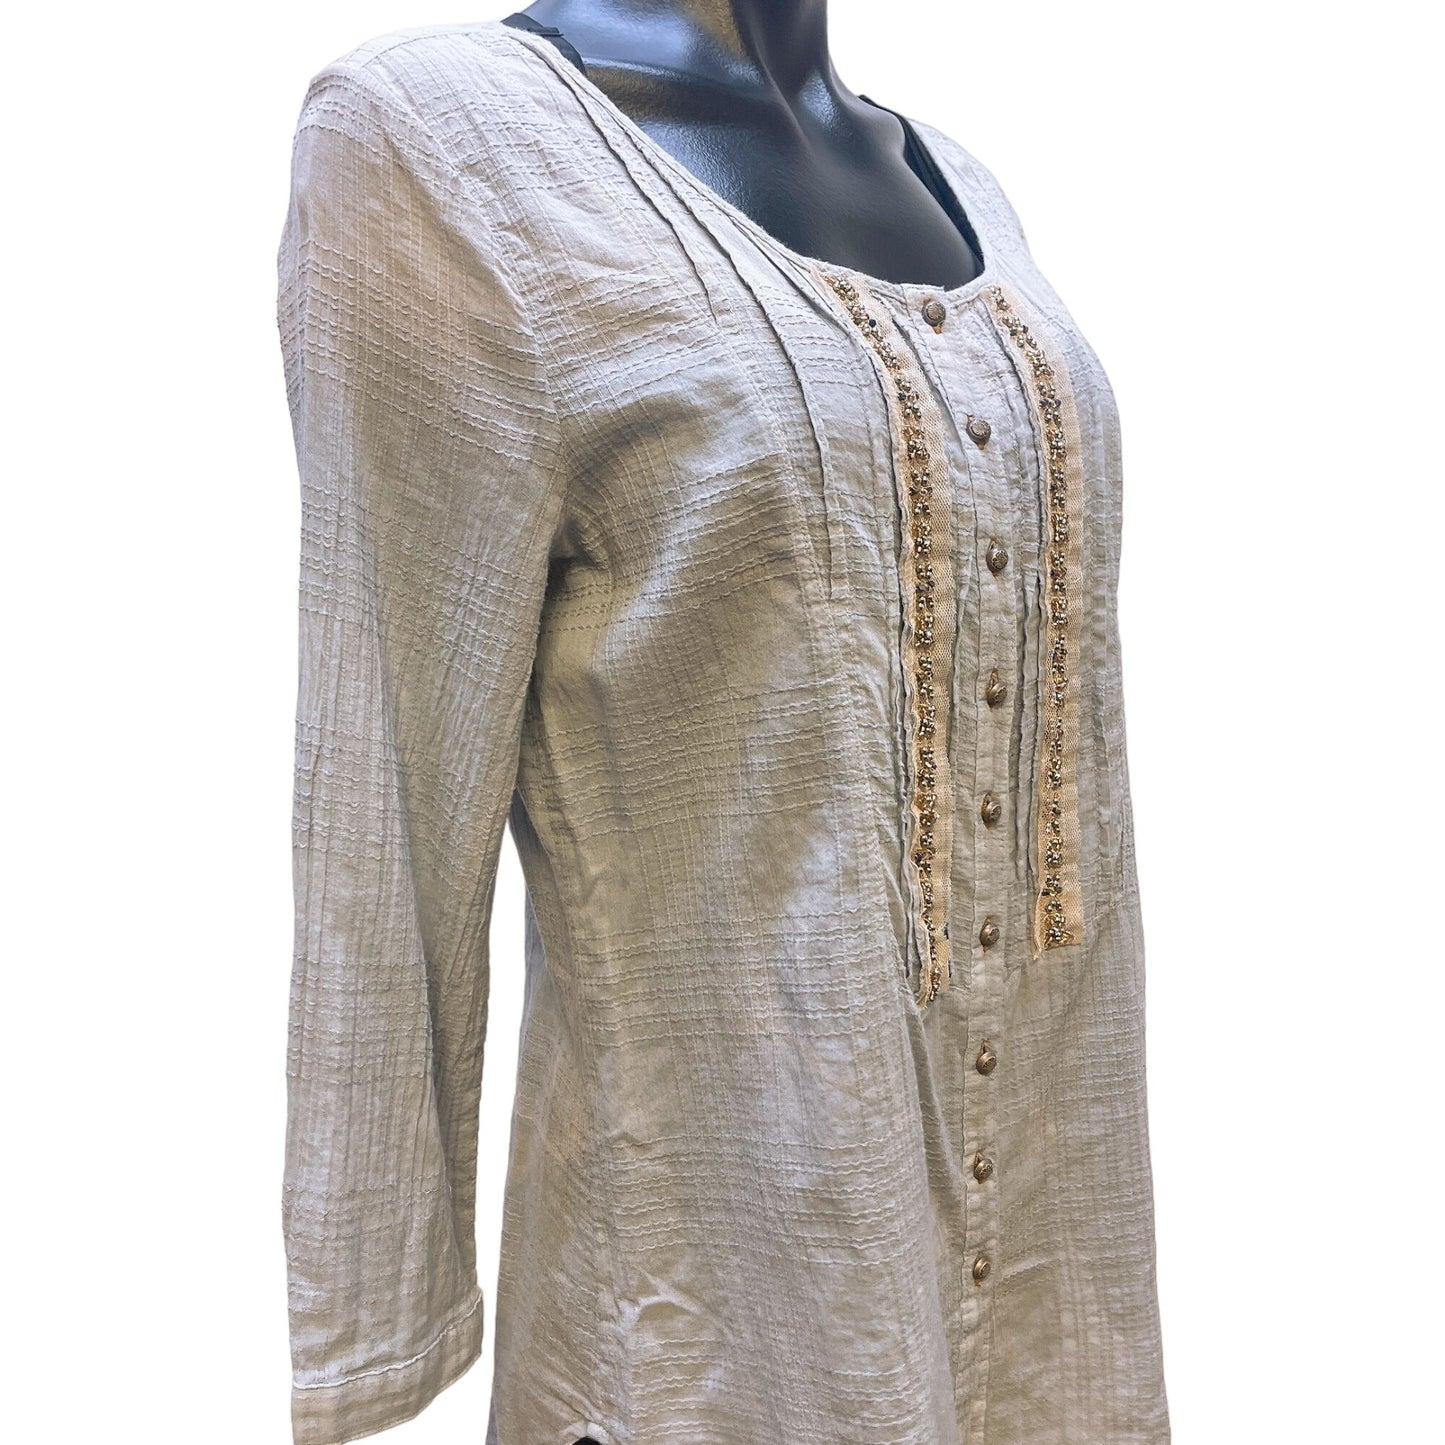 *NWT Aratta Silent Journey Gray Embellished Blouse Small